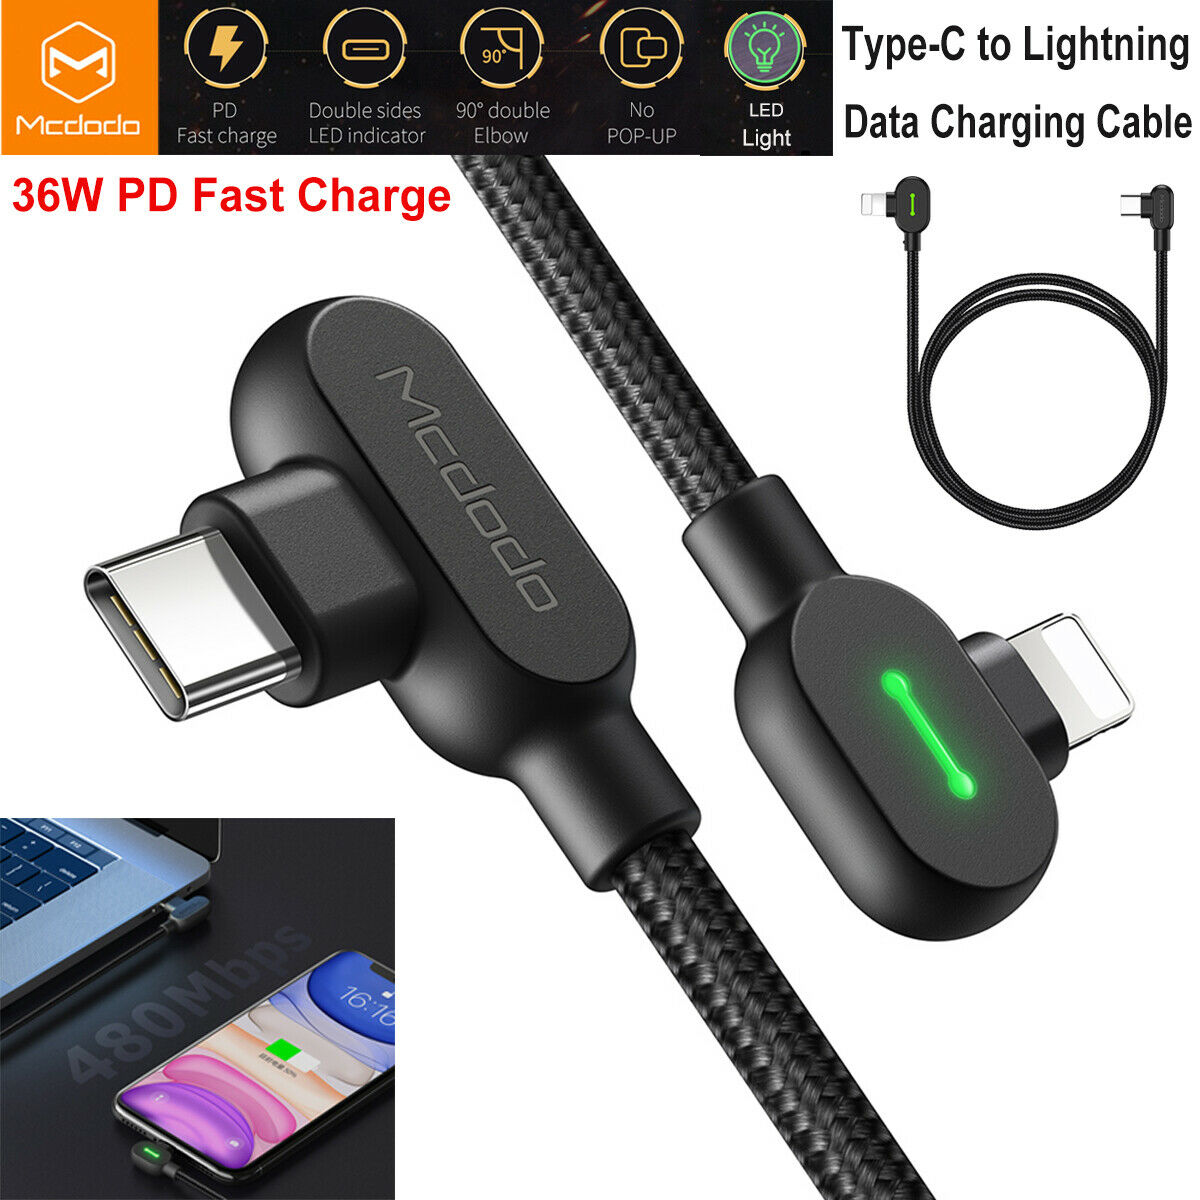 Renacimiento Cenar sentido Mcdodo 90° Elbow Type-C Lightning PD Fast Charge Cable for iPhone –  TaiMarket.com